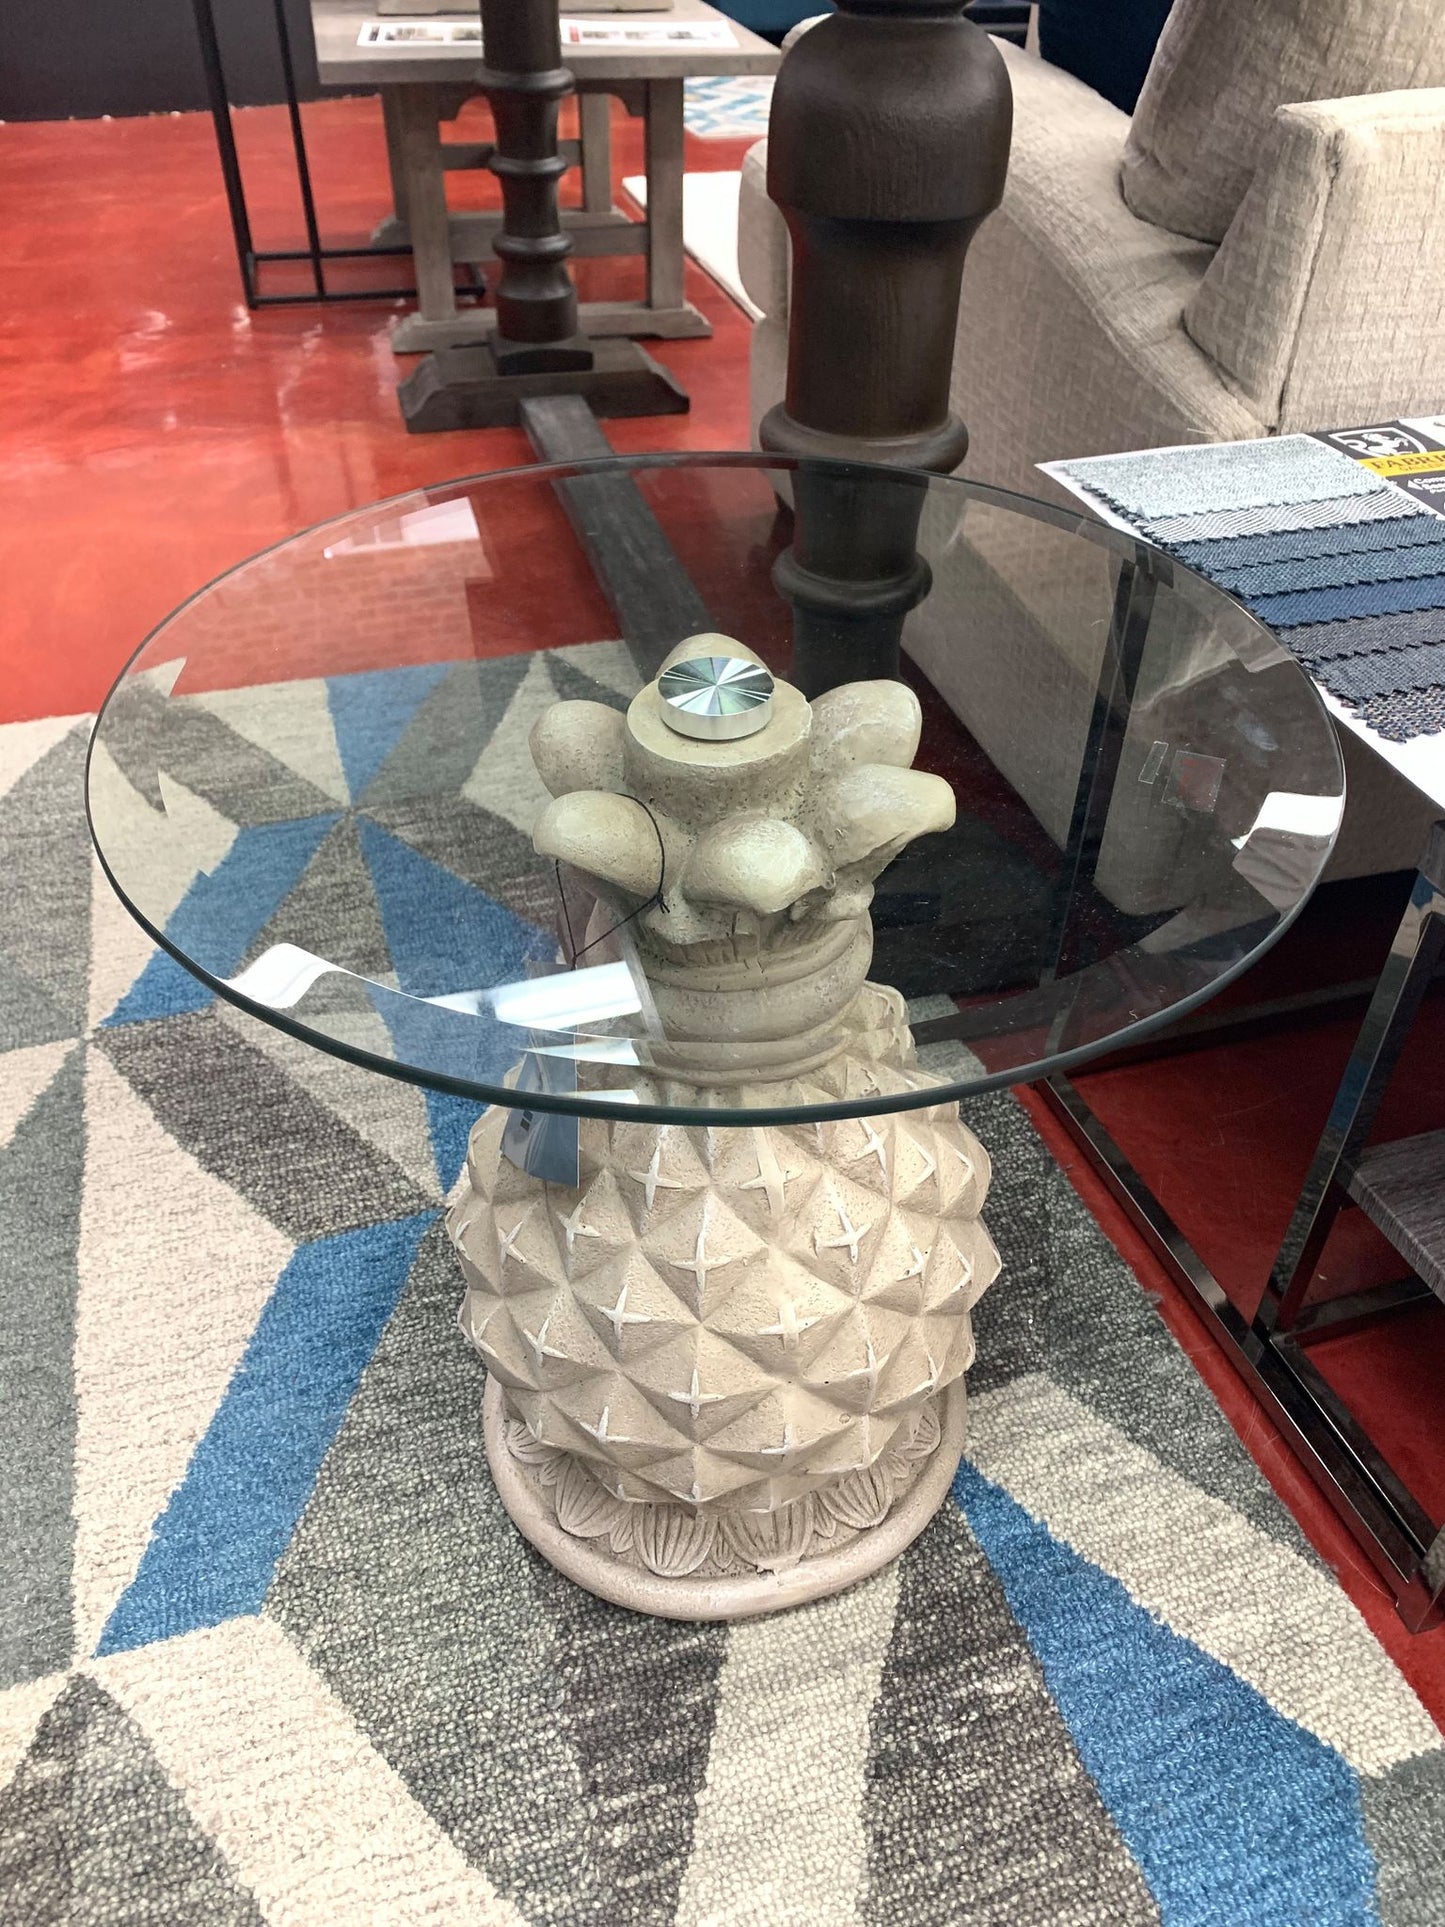 Penelope the Pineapple Side Table